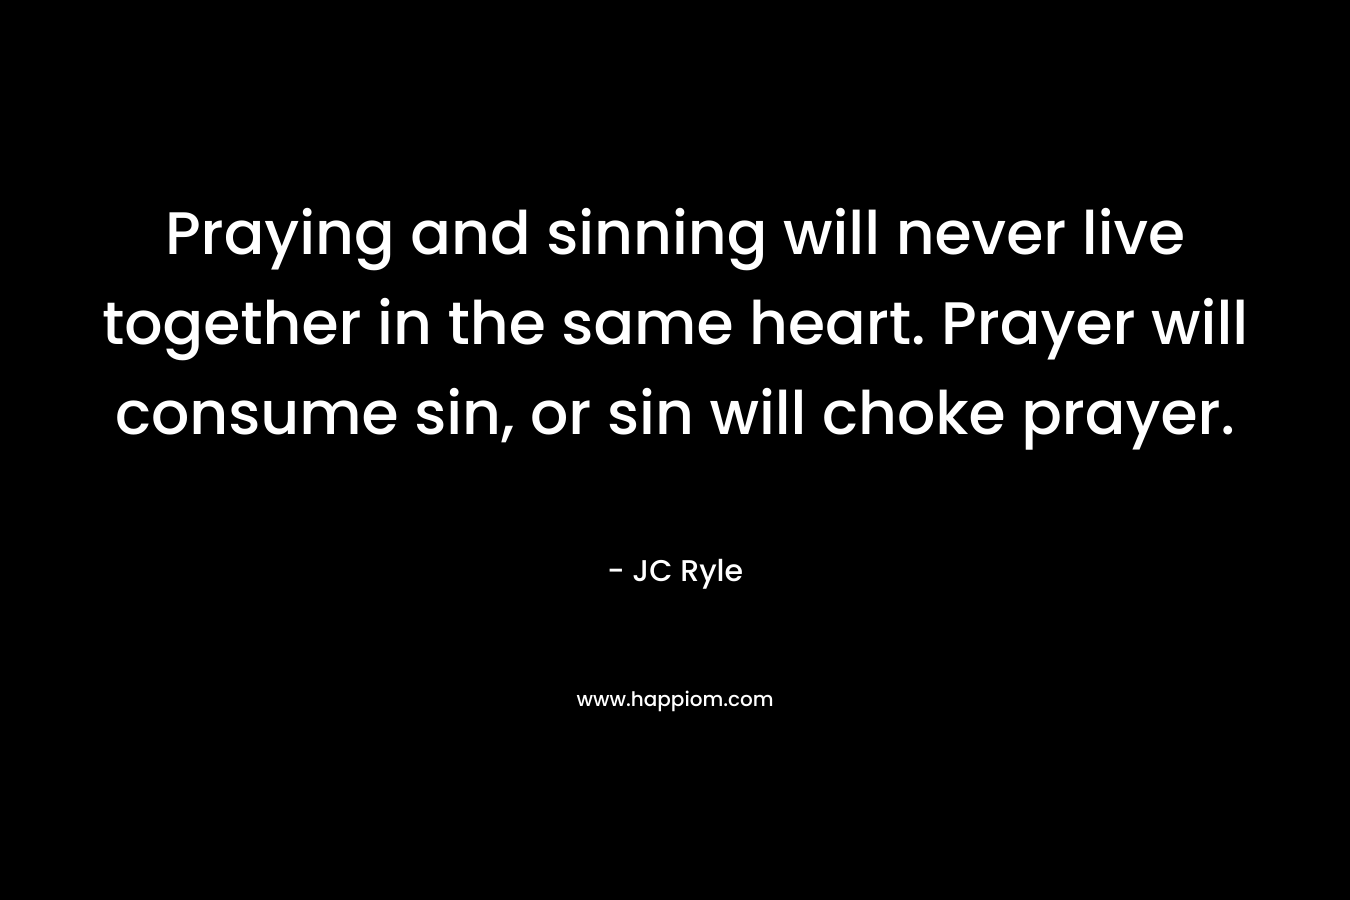 Praying and sinning will never live together in the same heart. Prayer will consume sin, or sin will choke prayer. – JC Ryle